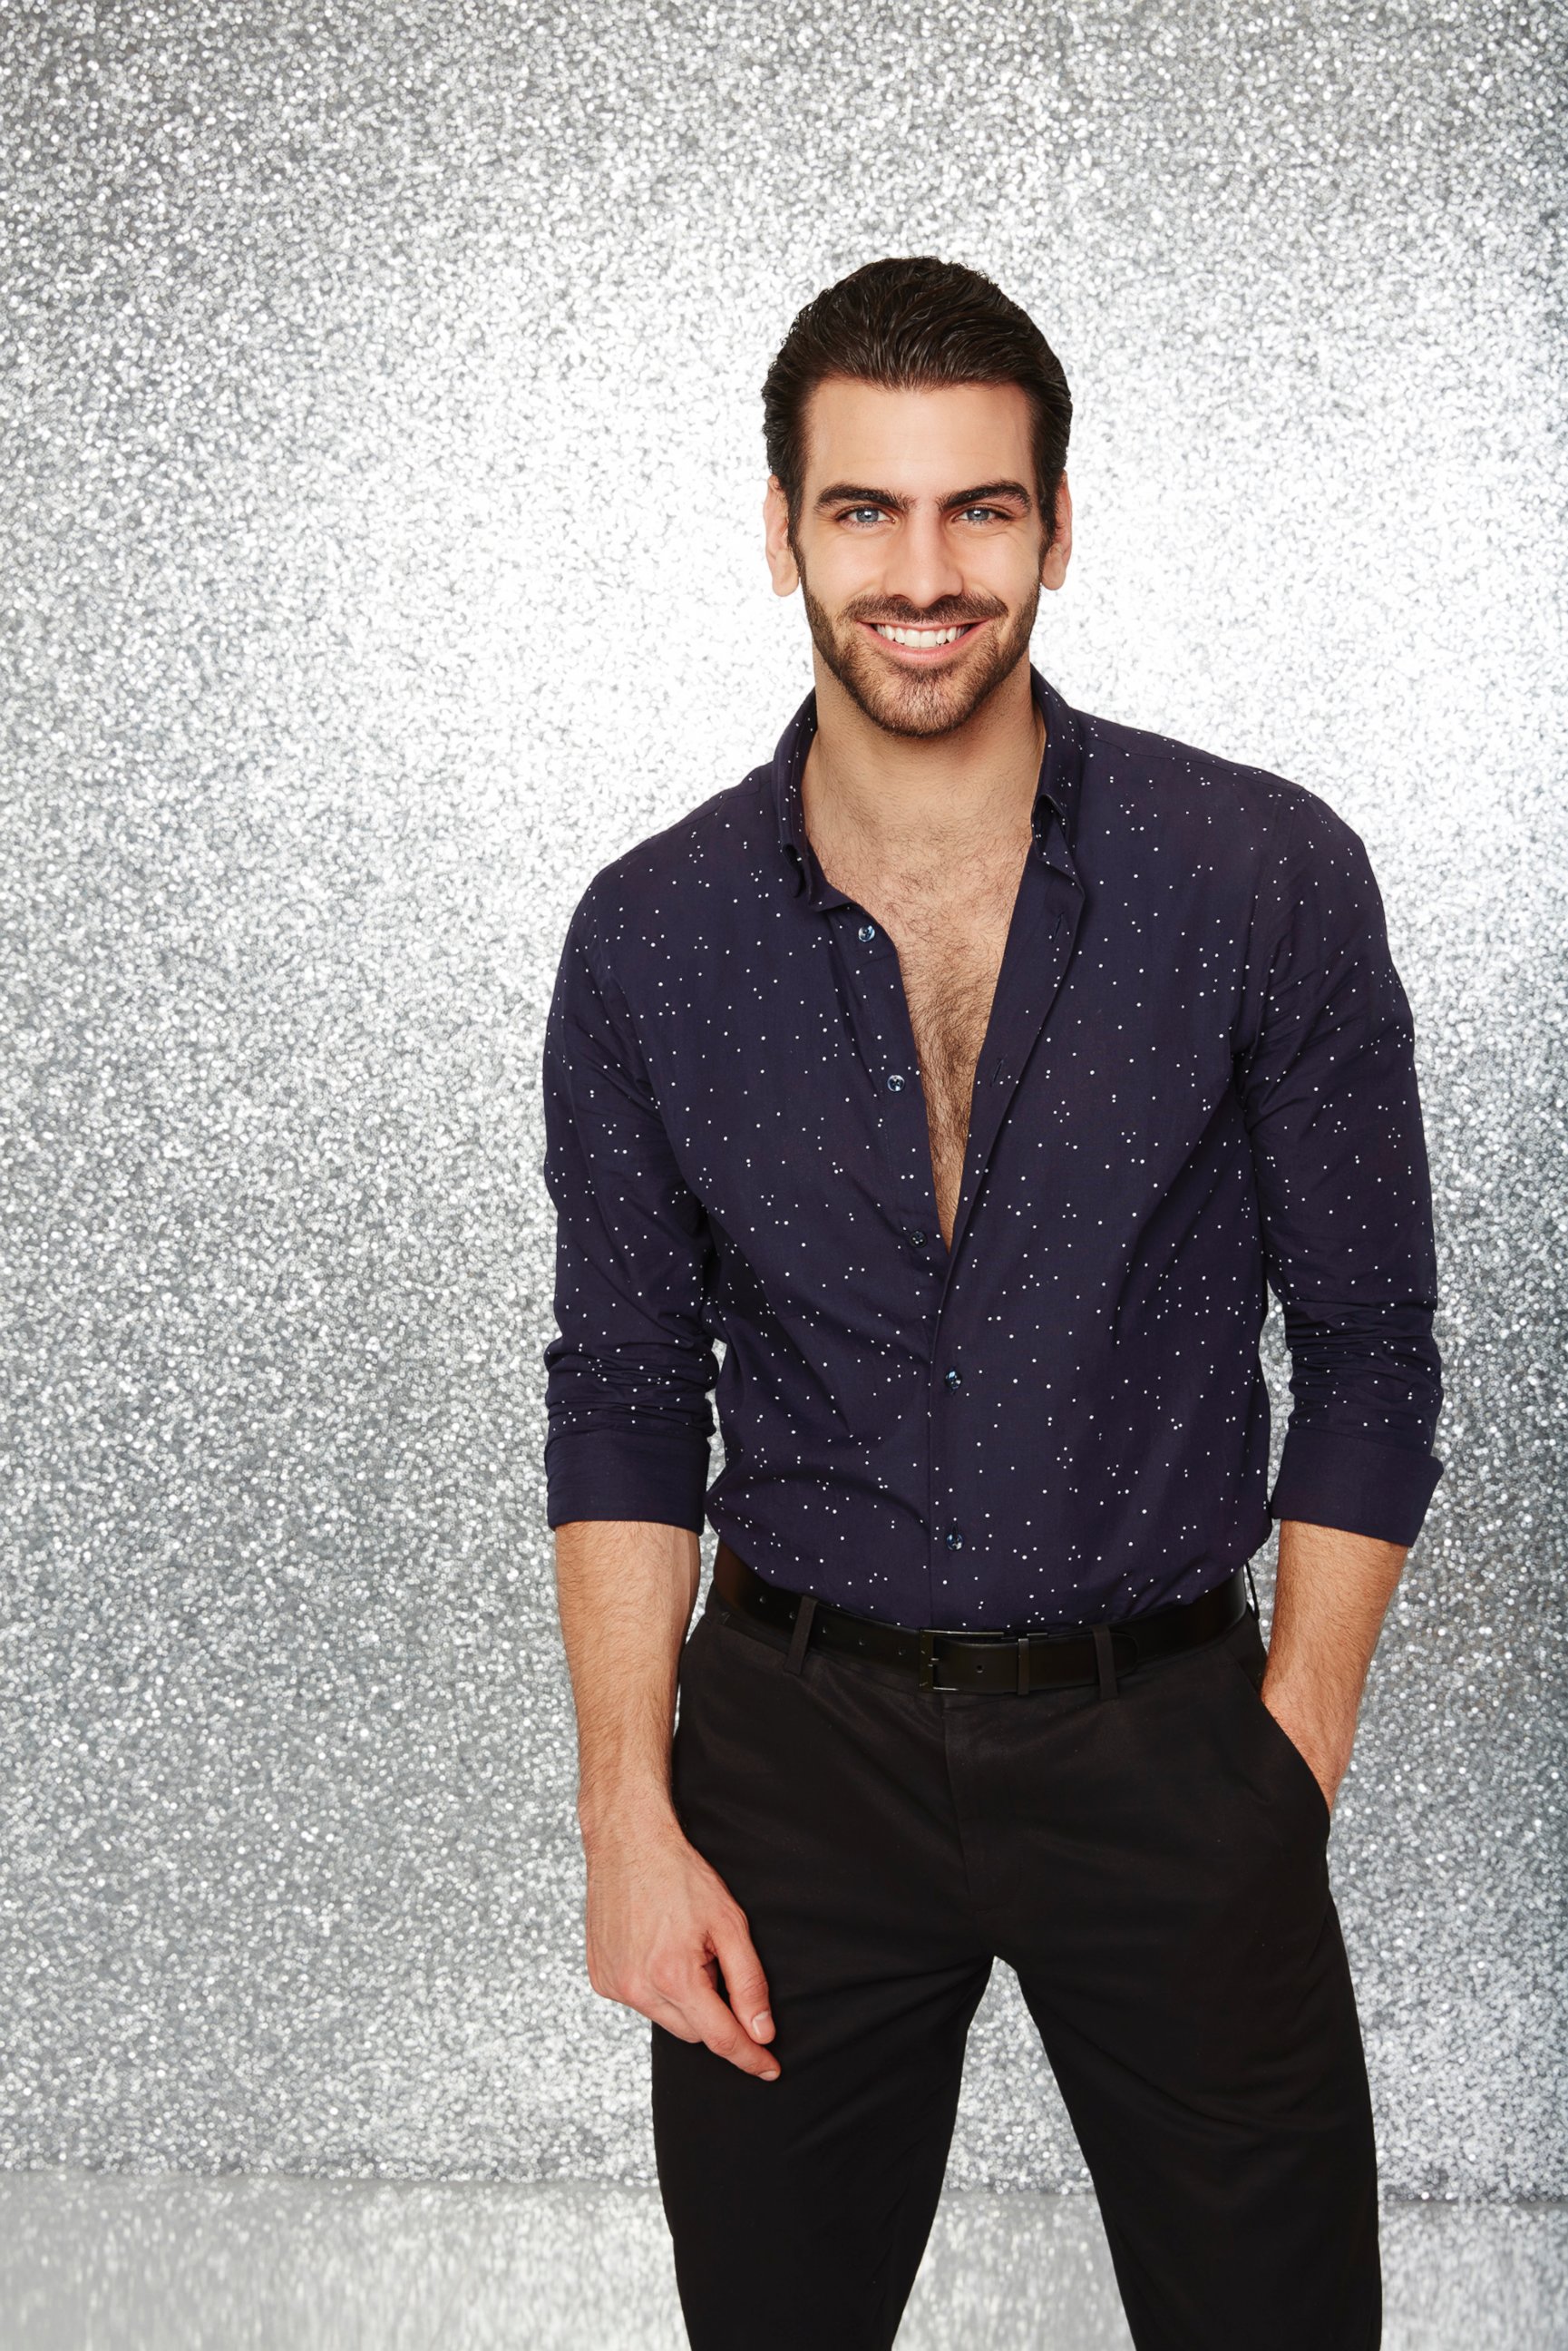 PHOTO: Nyle DiMarco and the rest of the stars will grace the ballroom floor for the first time on live national television with their professional partners during the two-hour season premiere of "Dancing with the Stars," on Monday, March, 21, 2016.